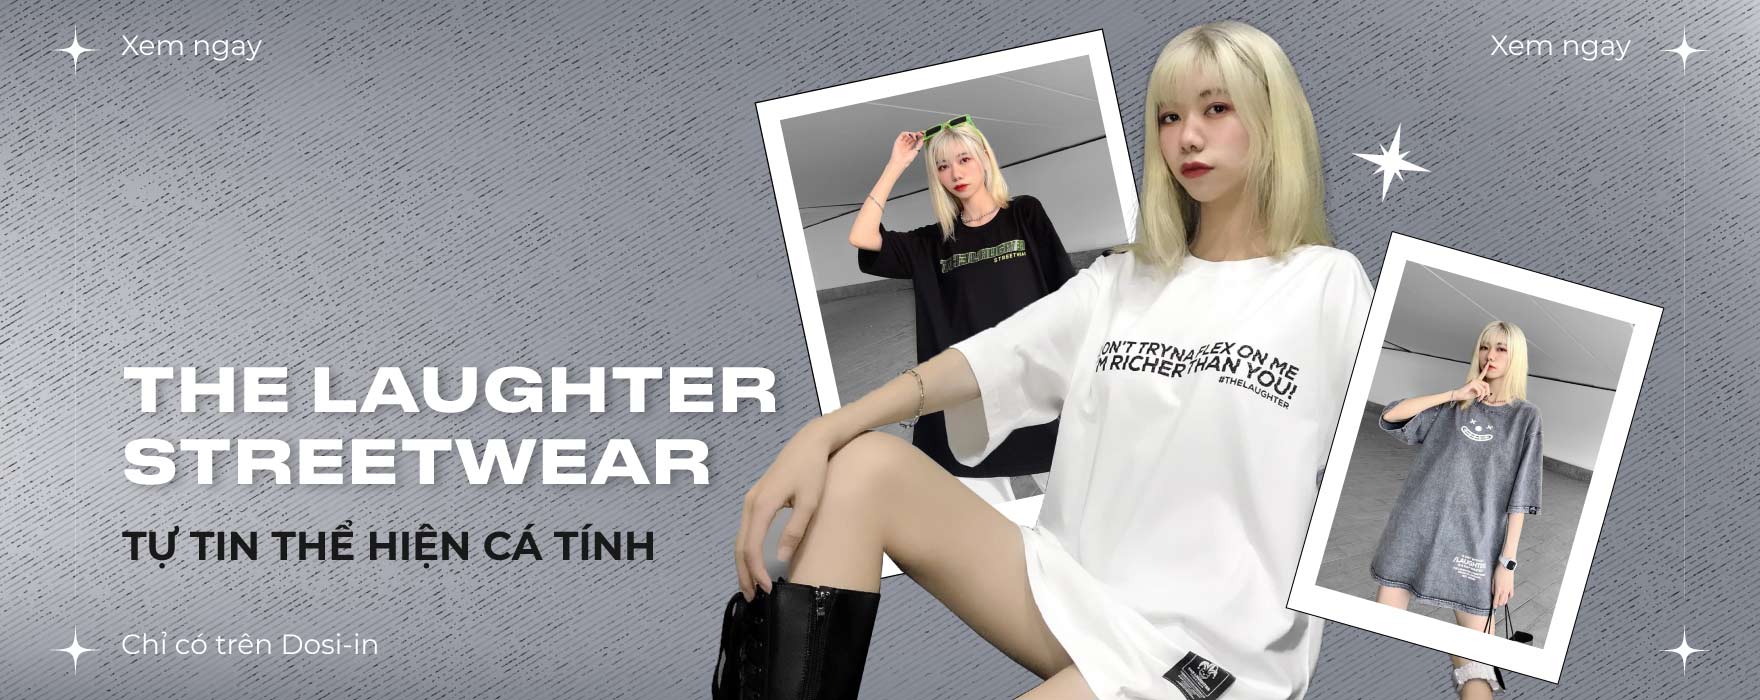 PC-PromotionBanner_The Laughter Streetwear 